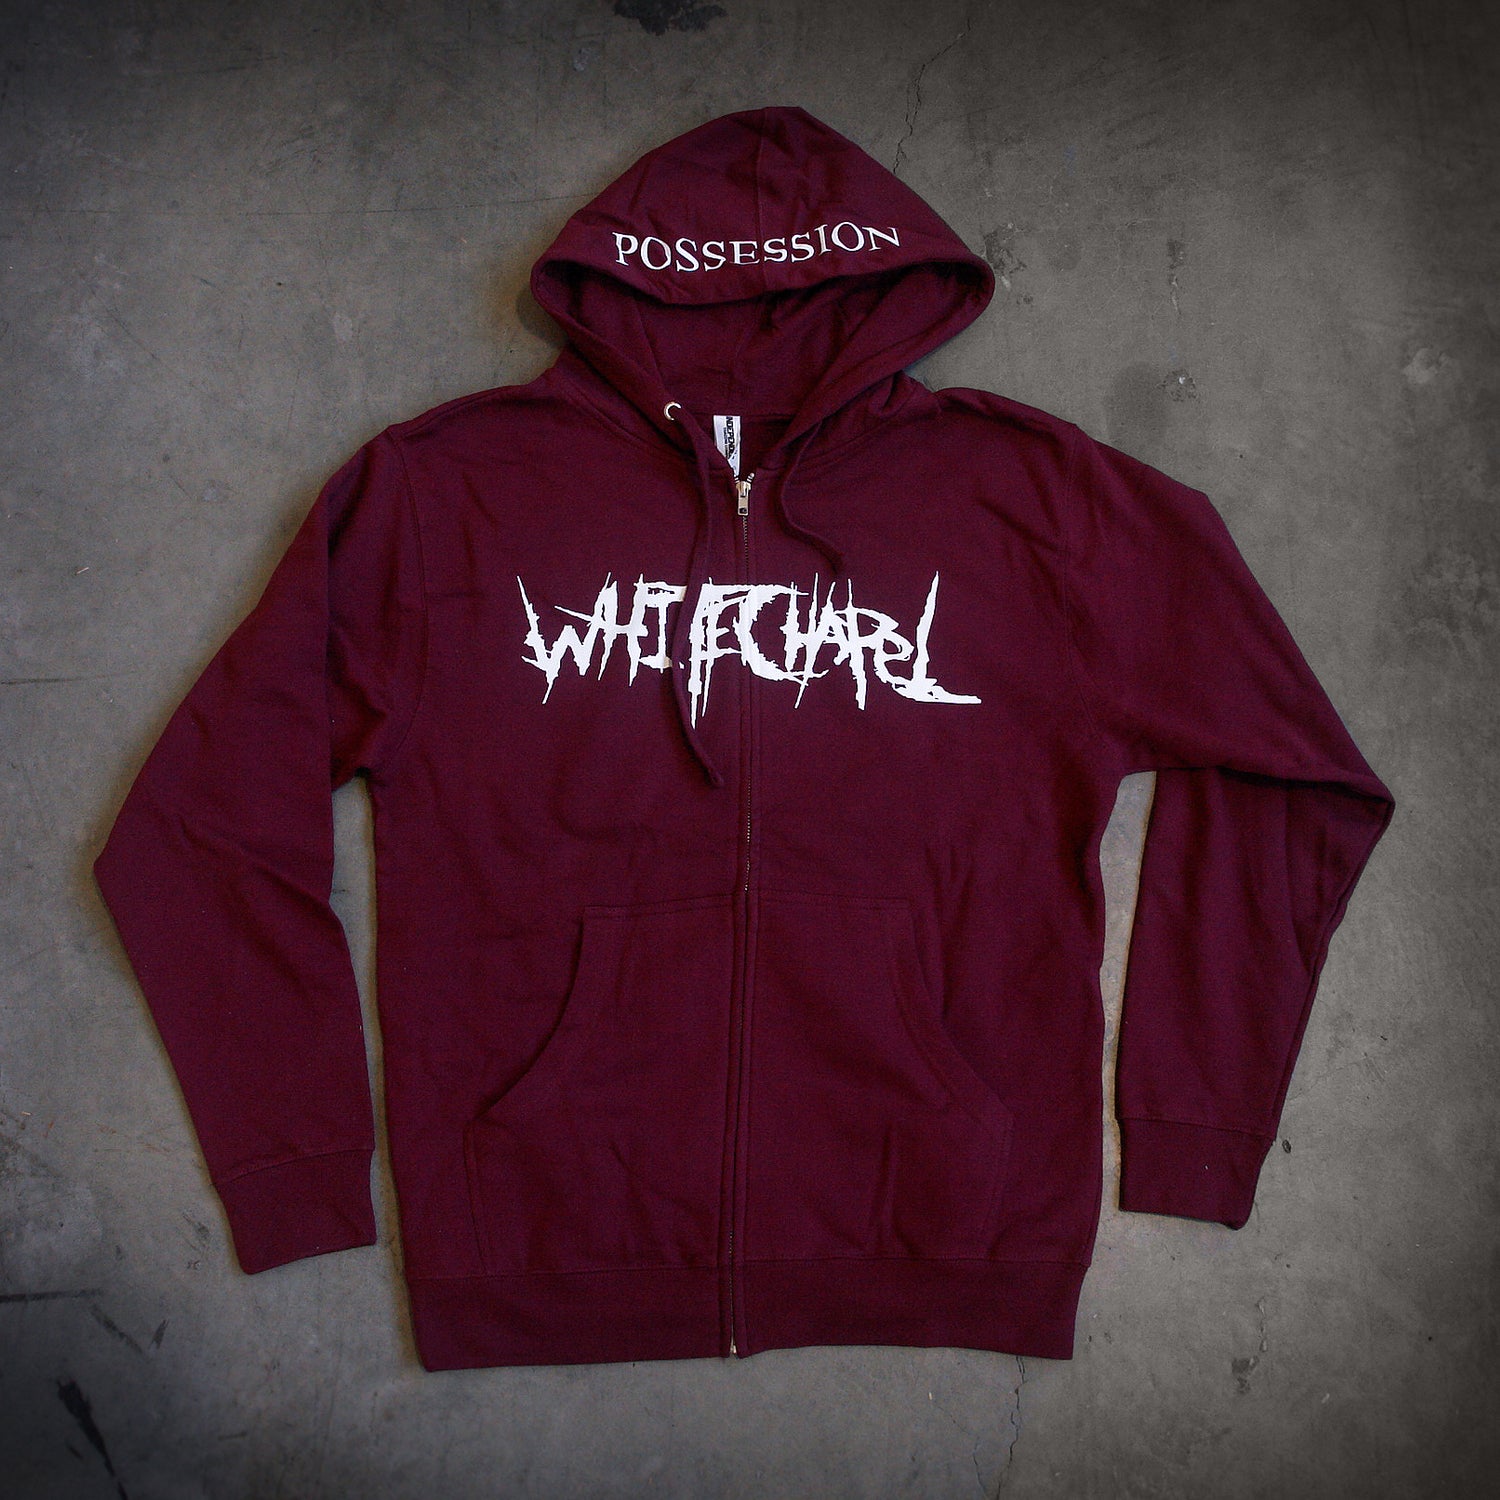 image of a maroon zip up hoodie laid flat on a concrete floor.  front of the hoodie is on the left and has a white print across the chest that says whitechapel. the hood is in the middle and shows a white print across the brim that says possession.